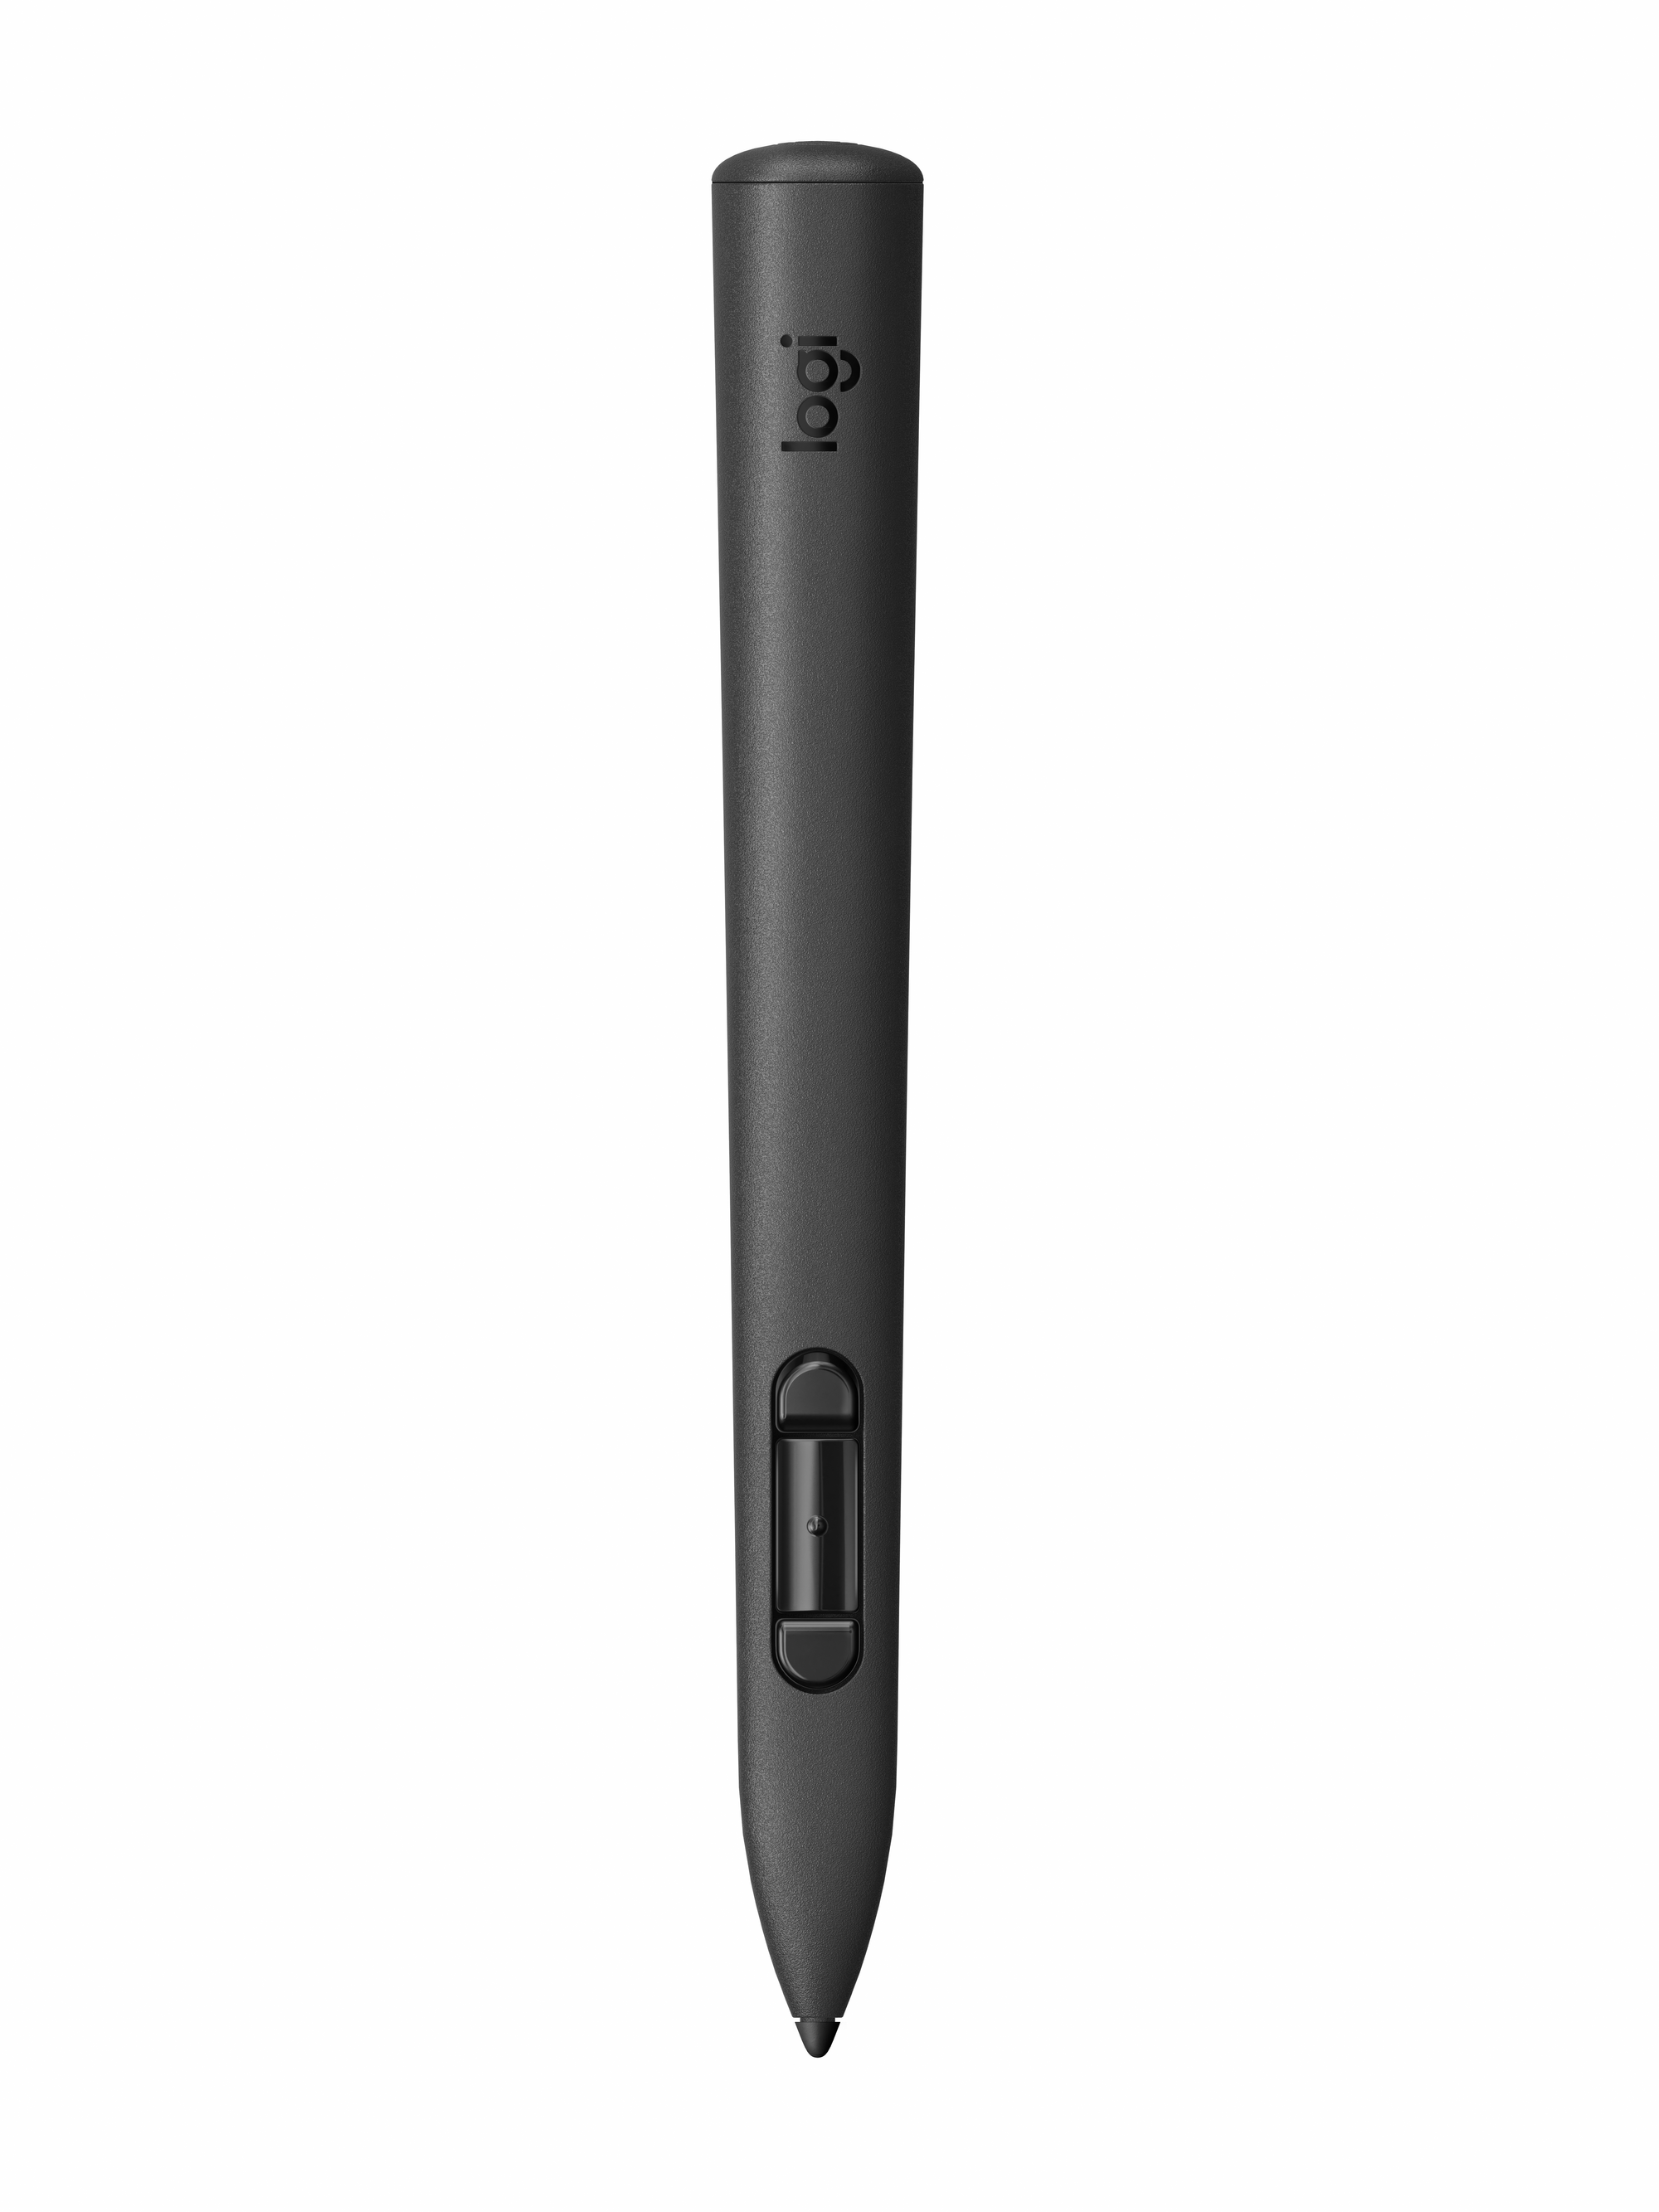 Logitech MX Ink Is A Tracked Stylus For Meta Quest